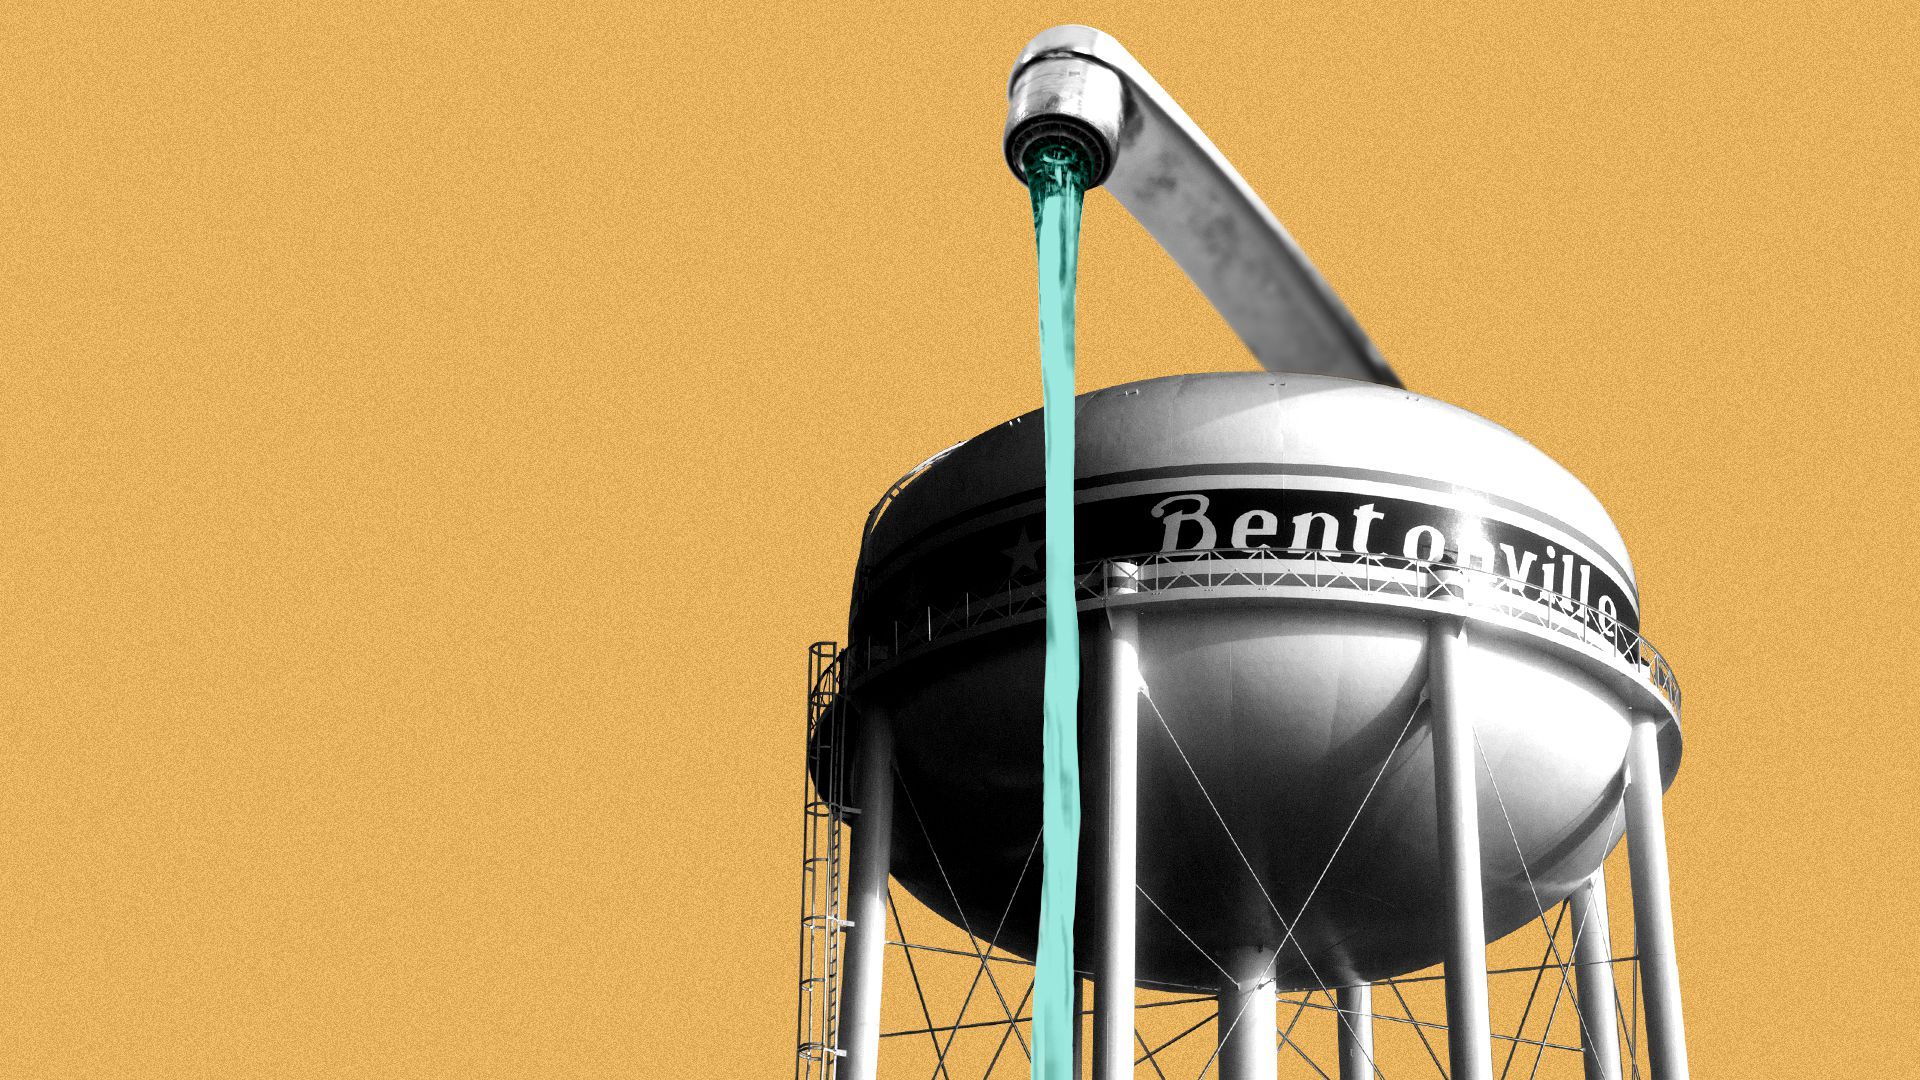 Illustration of the Bentonville Water Tower, with a faucet added to it.